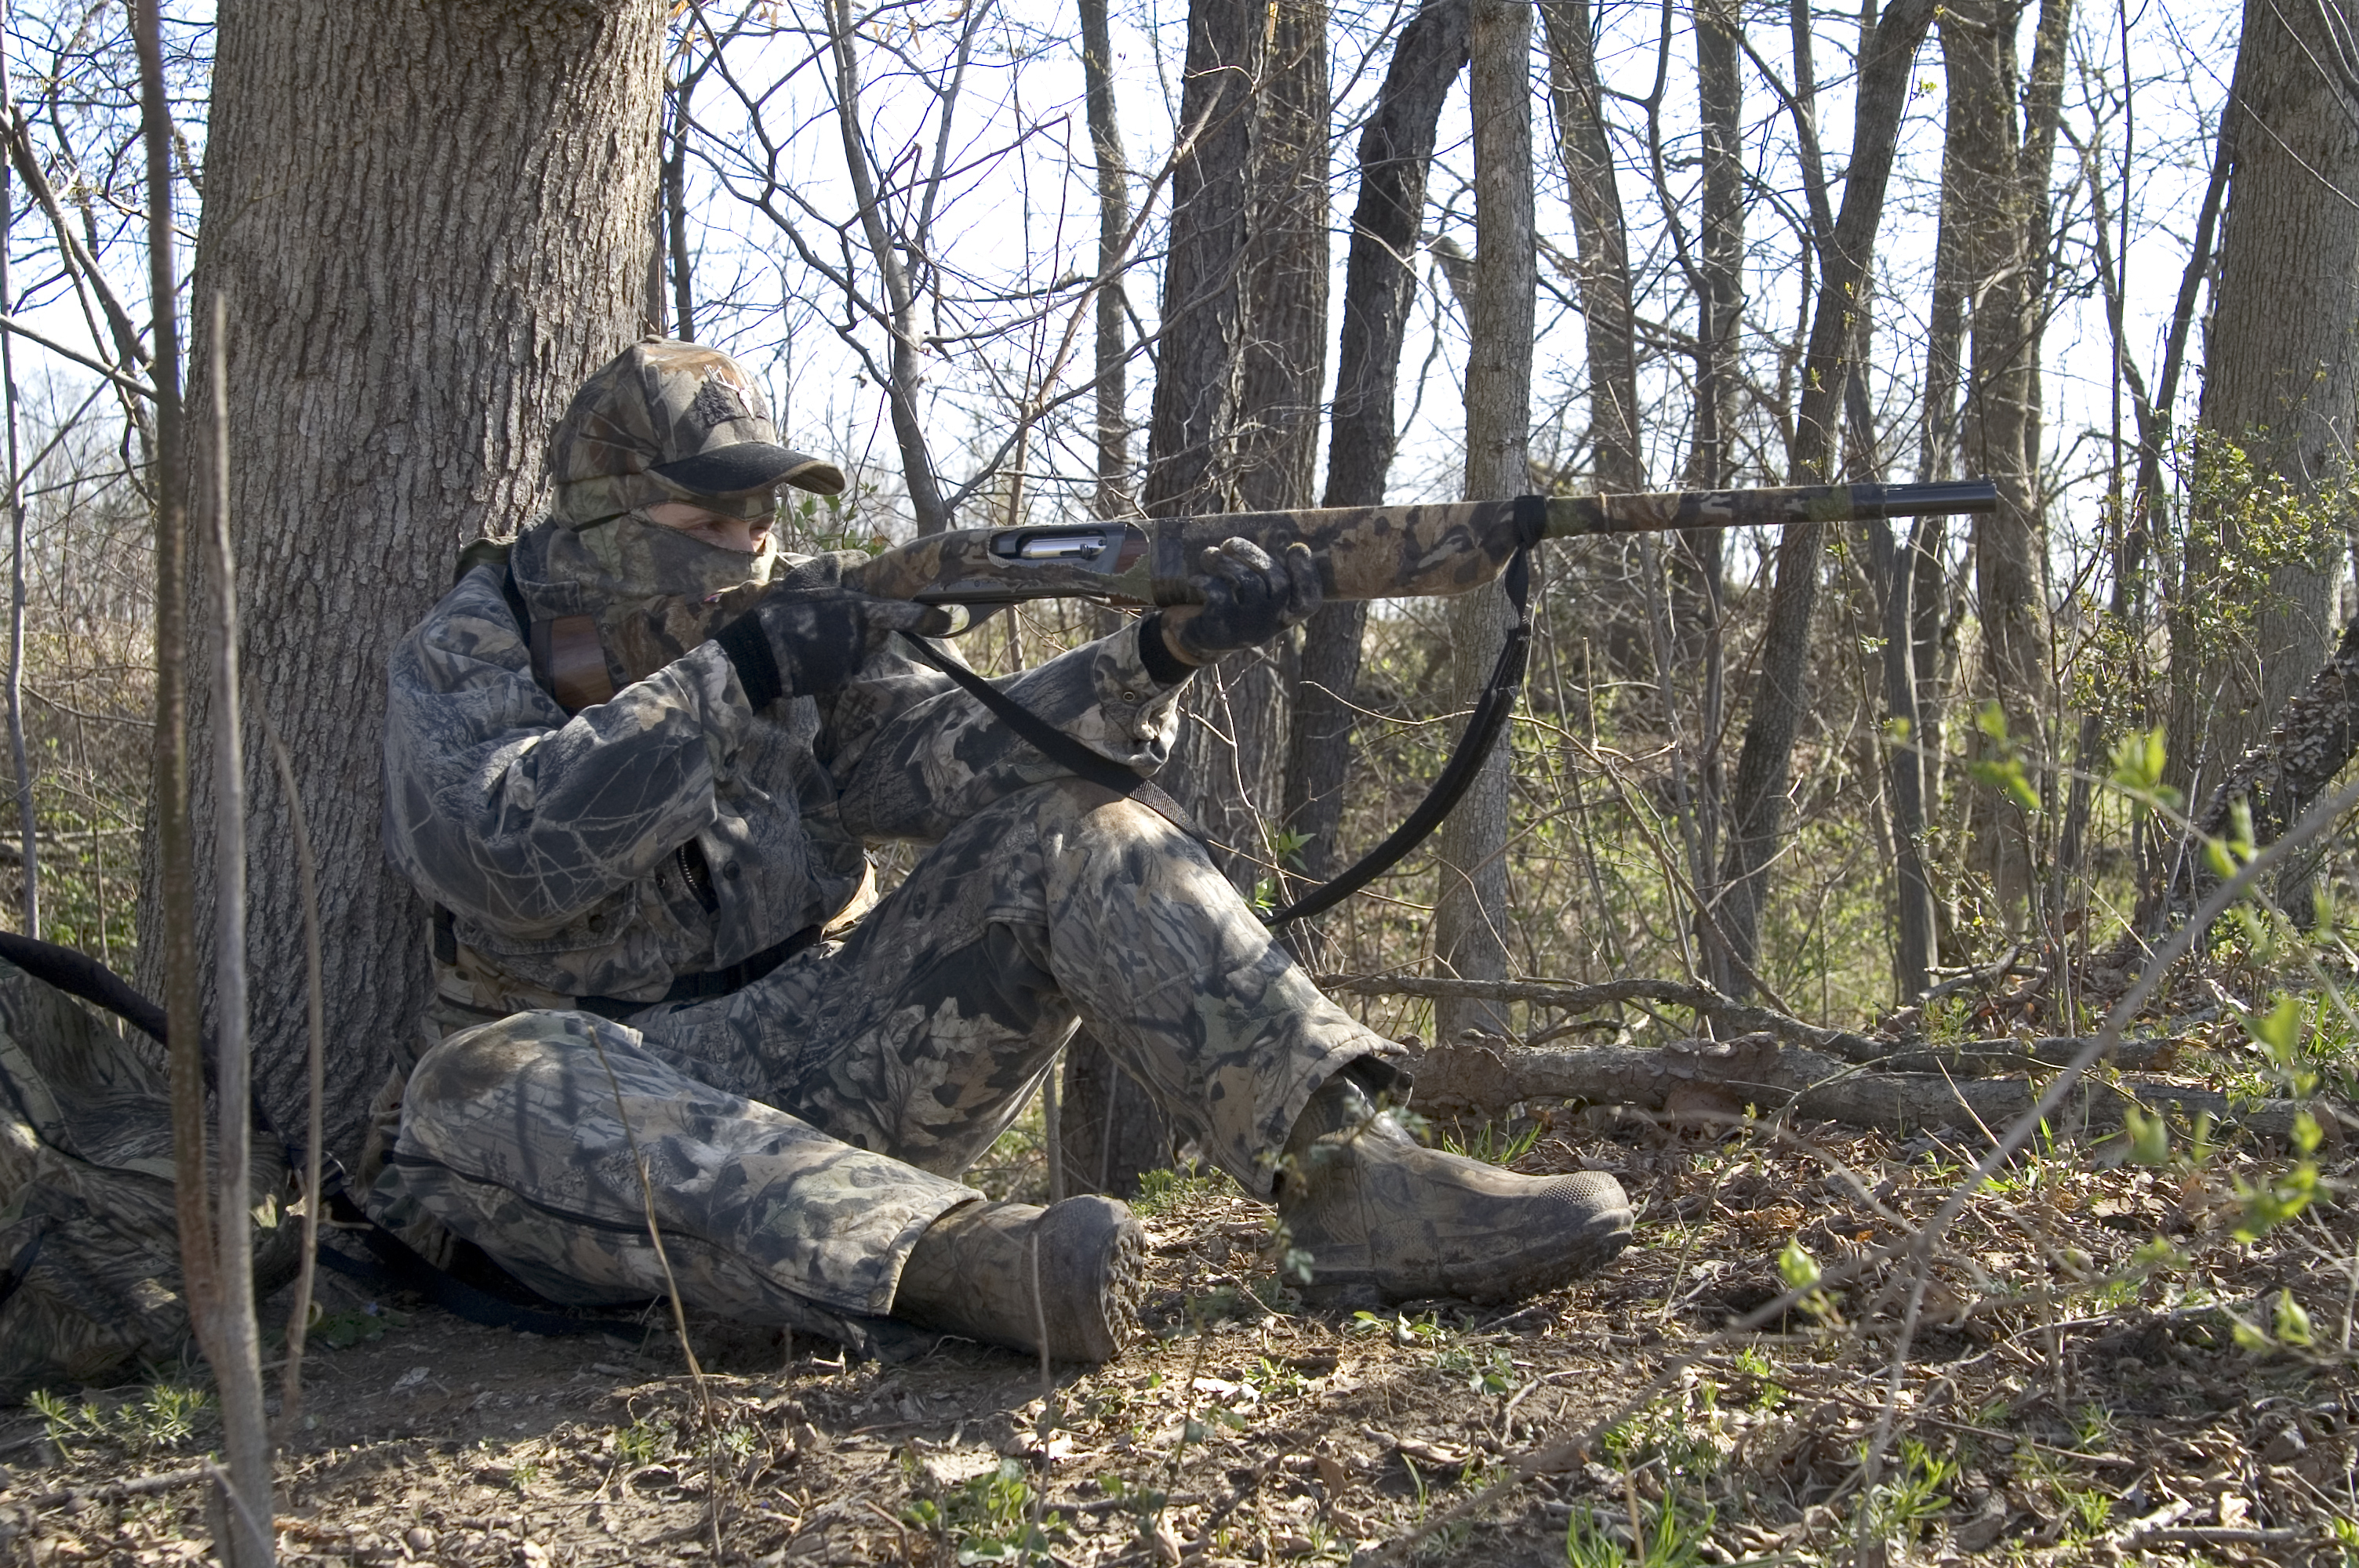 A hunter aims a firearm at a target, taking a hunter safety course concept. 